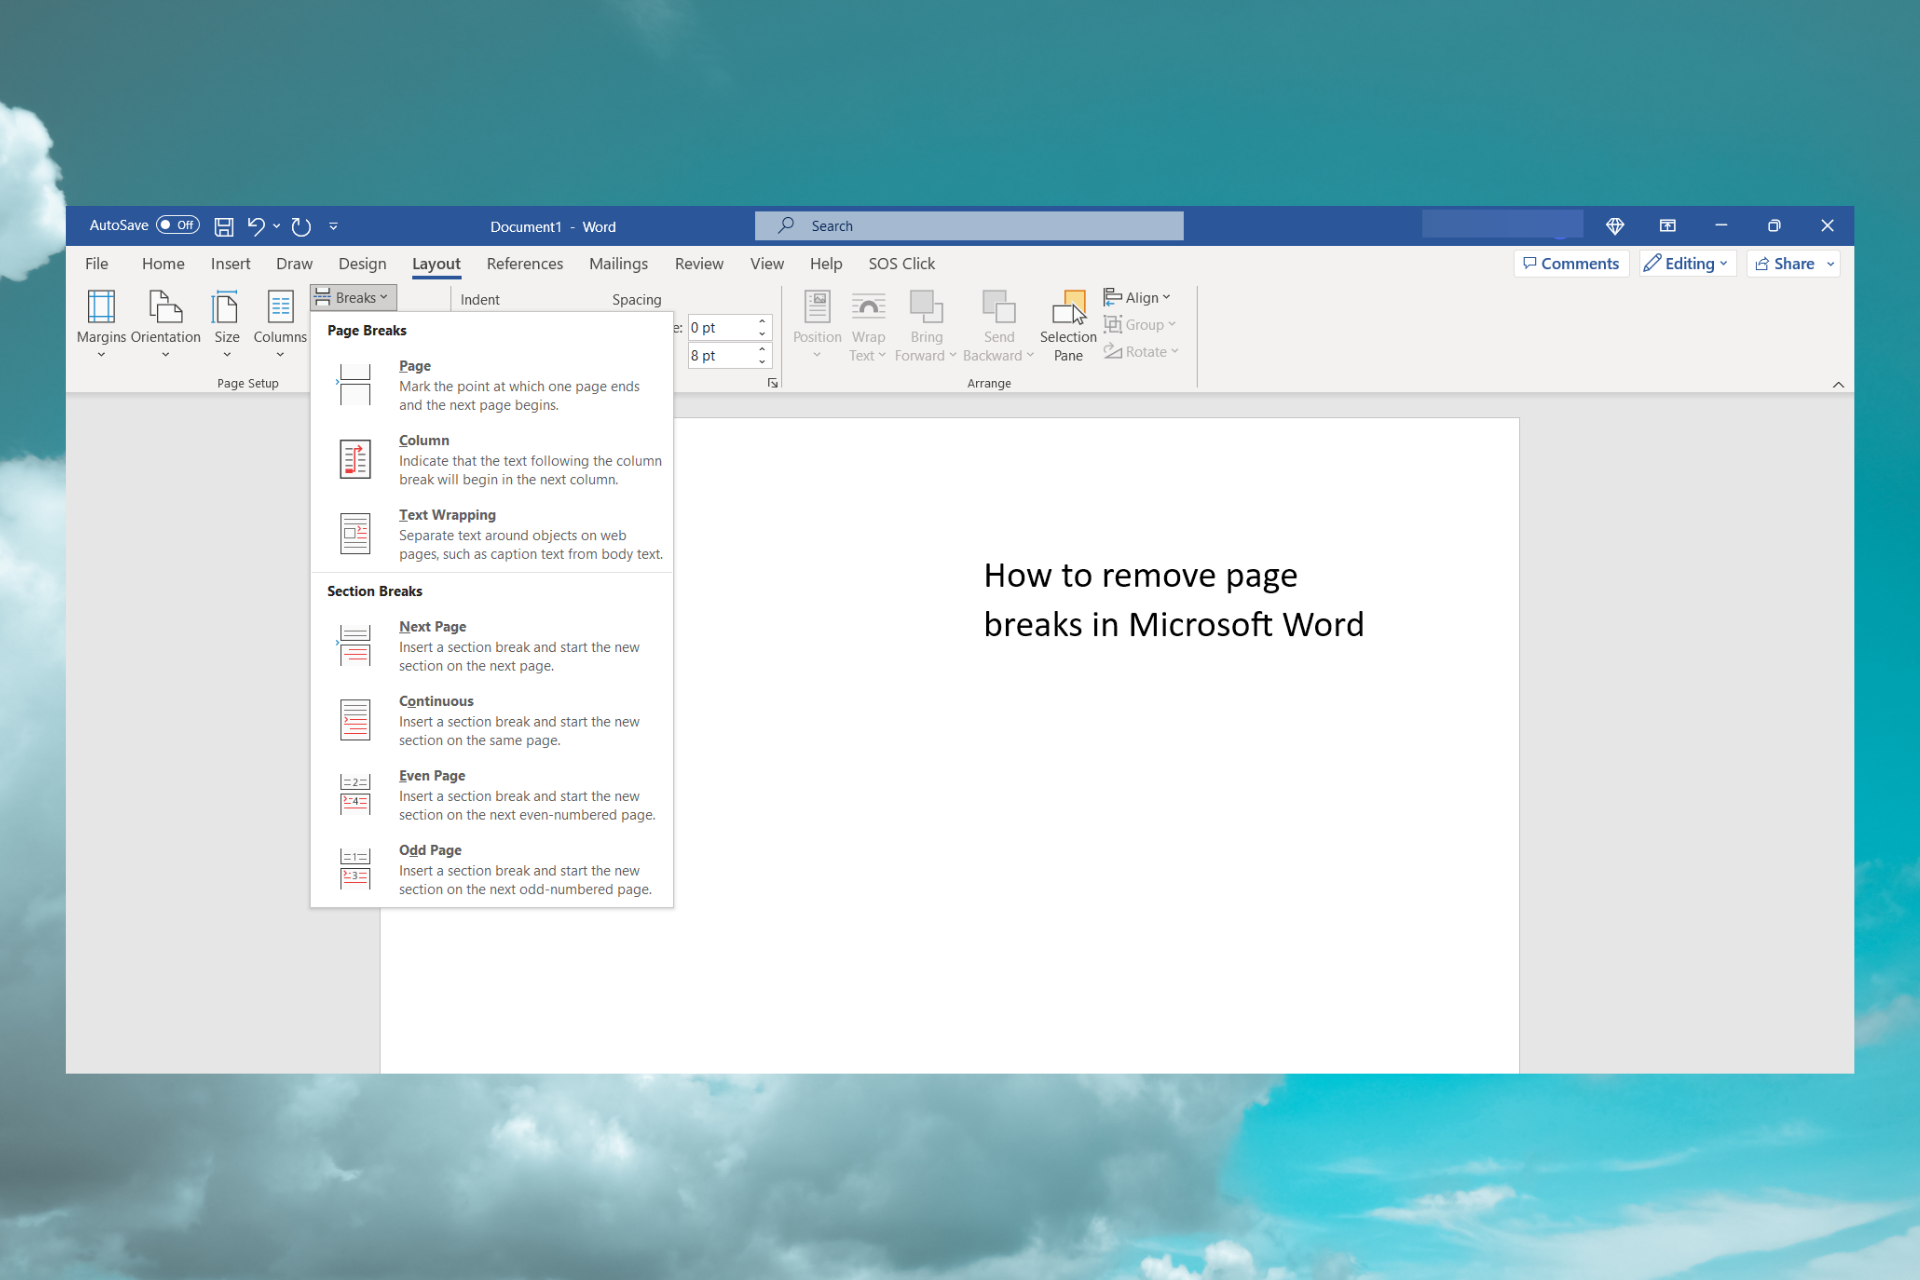 How to remove page breaks in Microsoft Word